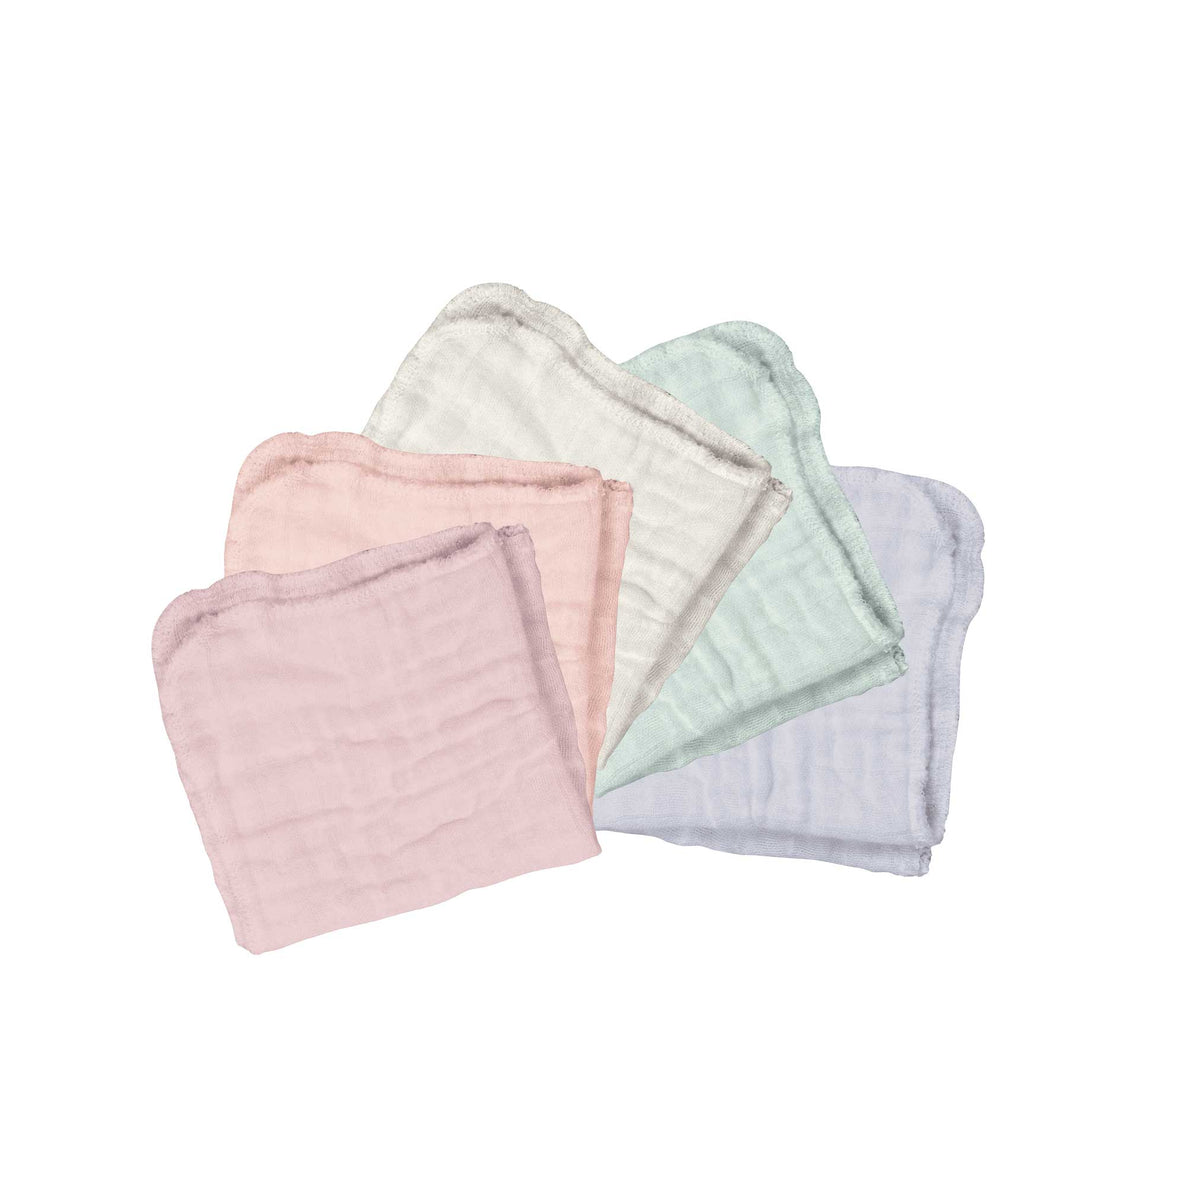 Cloth-Eez Organic Muslin Baby Wipes - One Layer Cotton